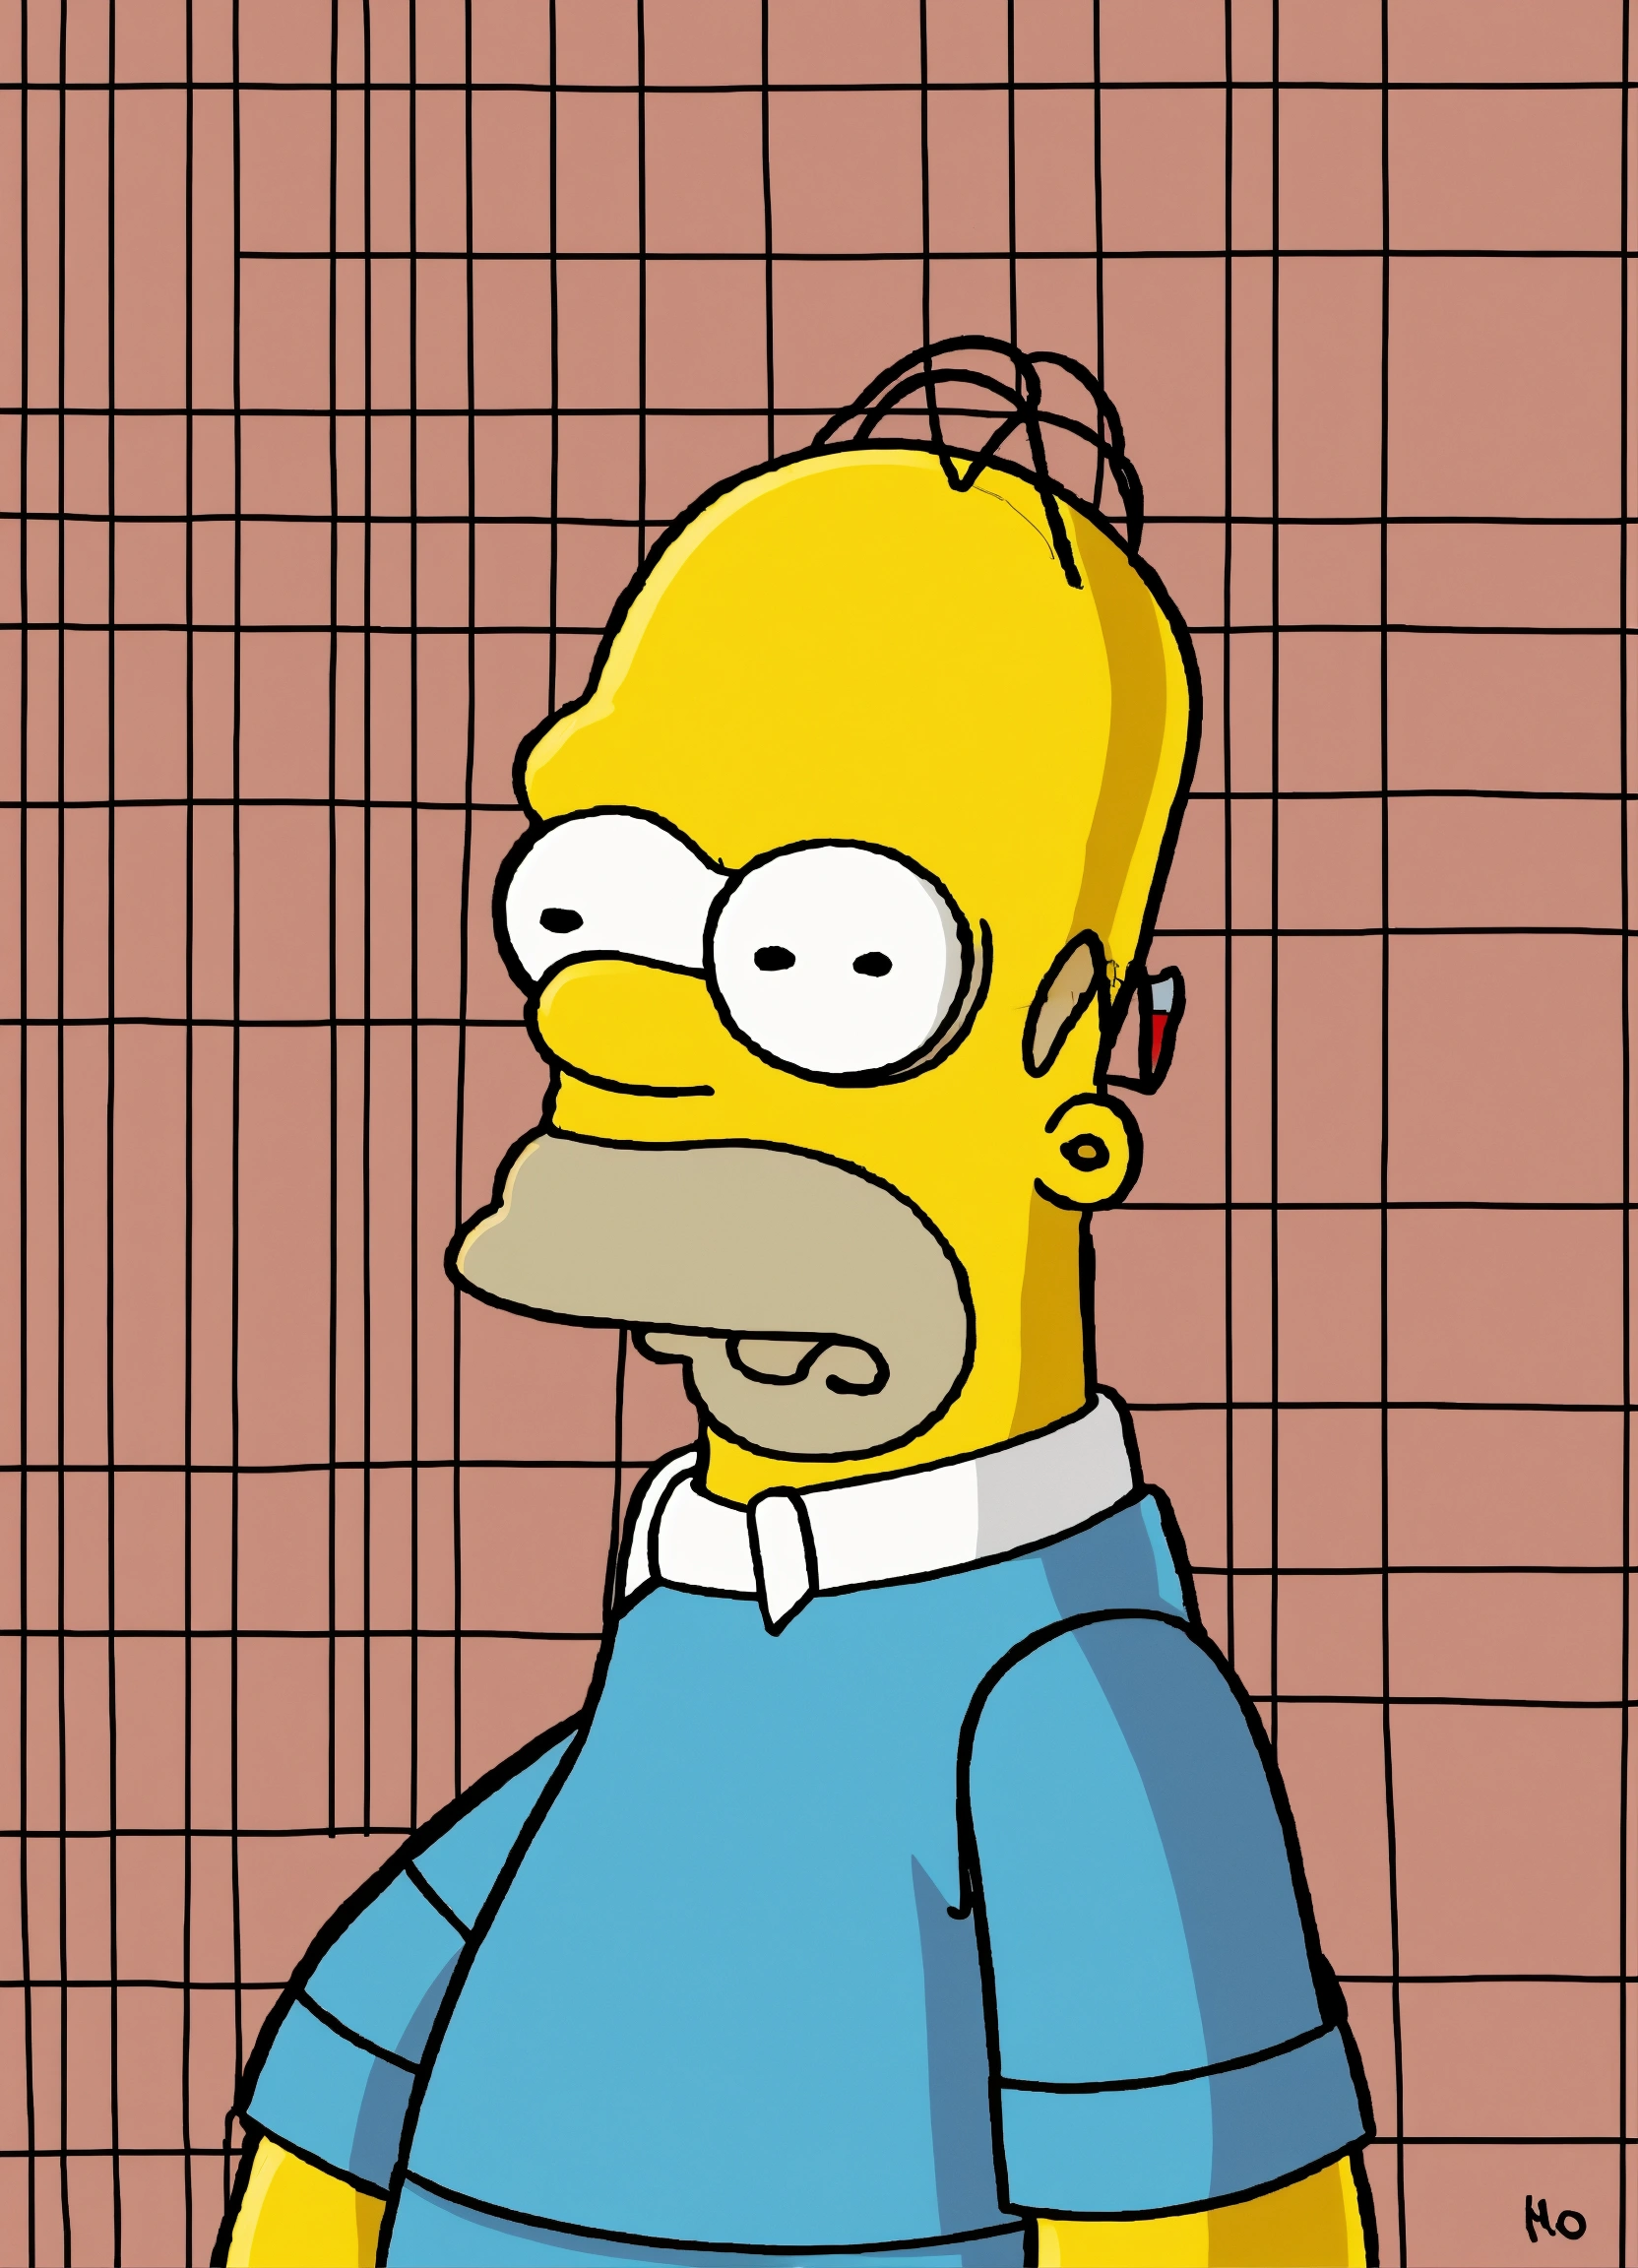 Lexica - Badly drawn Homer Simpson with his stubble line covering over ...